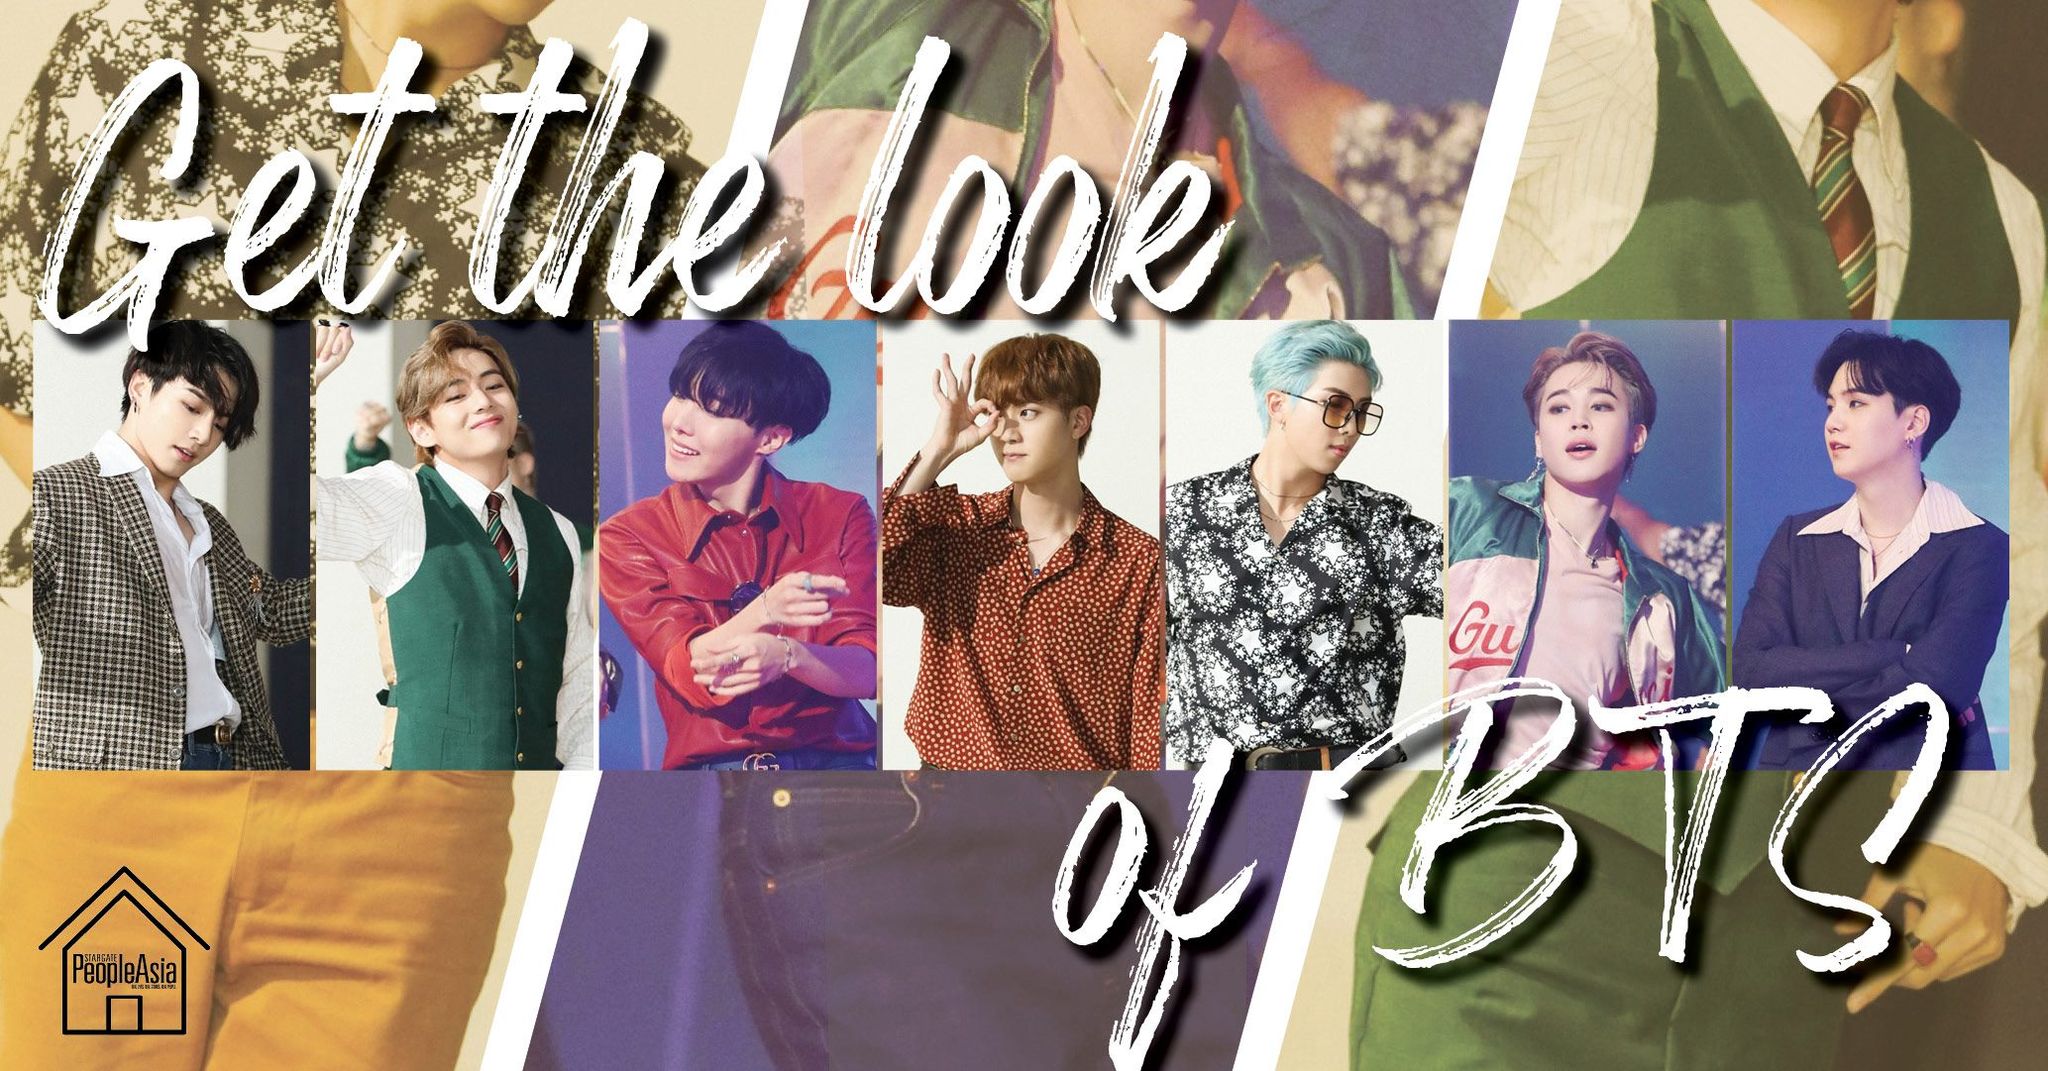 With boyband BTS, old’s cool again